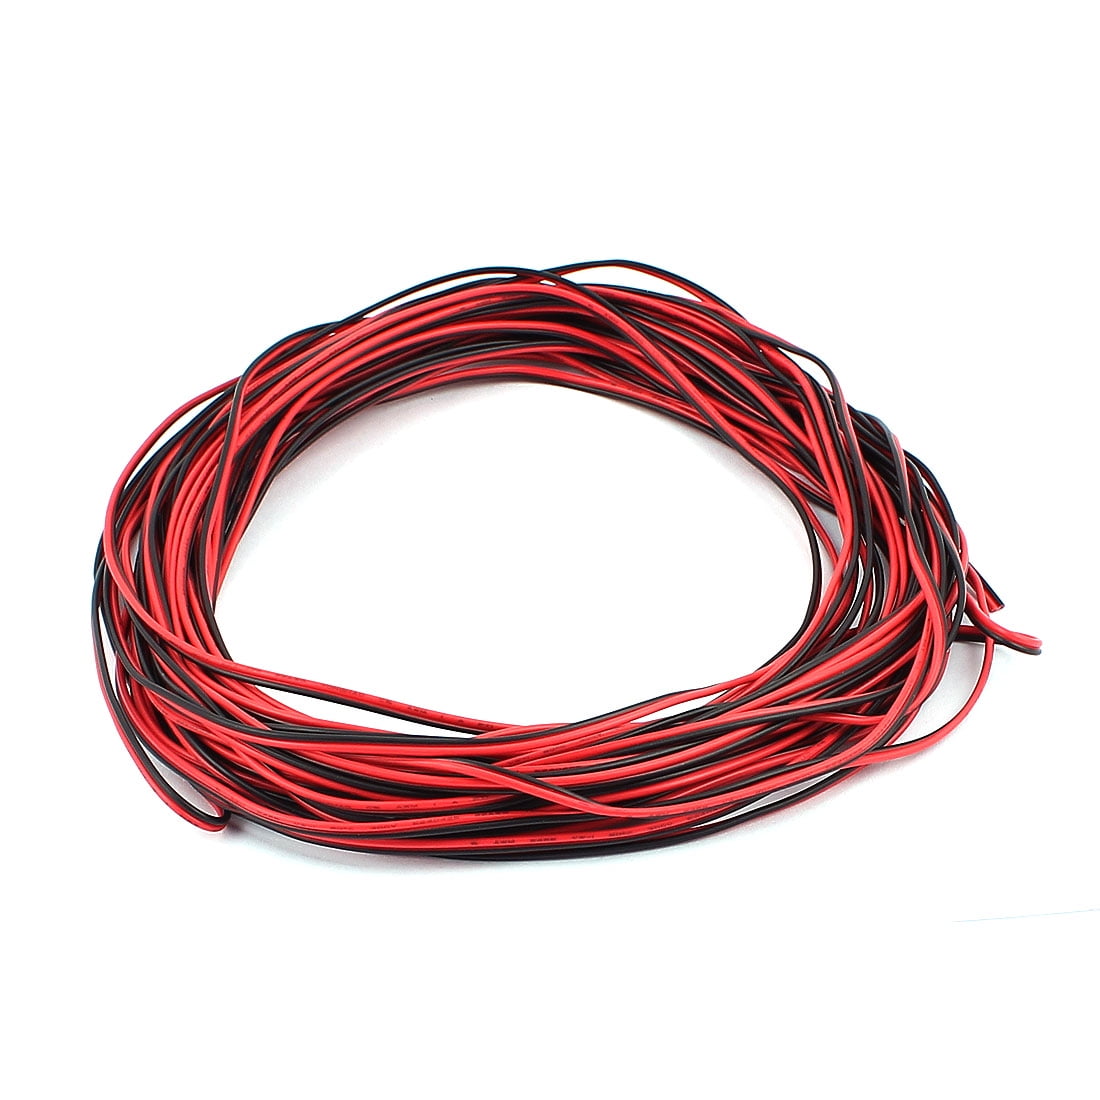 300V 22AWG 0.3mm2 49Ft 2 Strand PVC Electronic WIre Gauge Wires ...